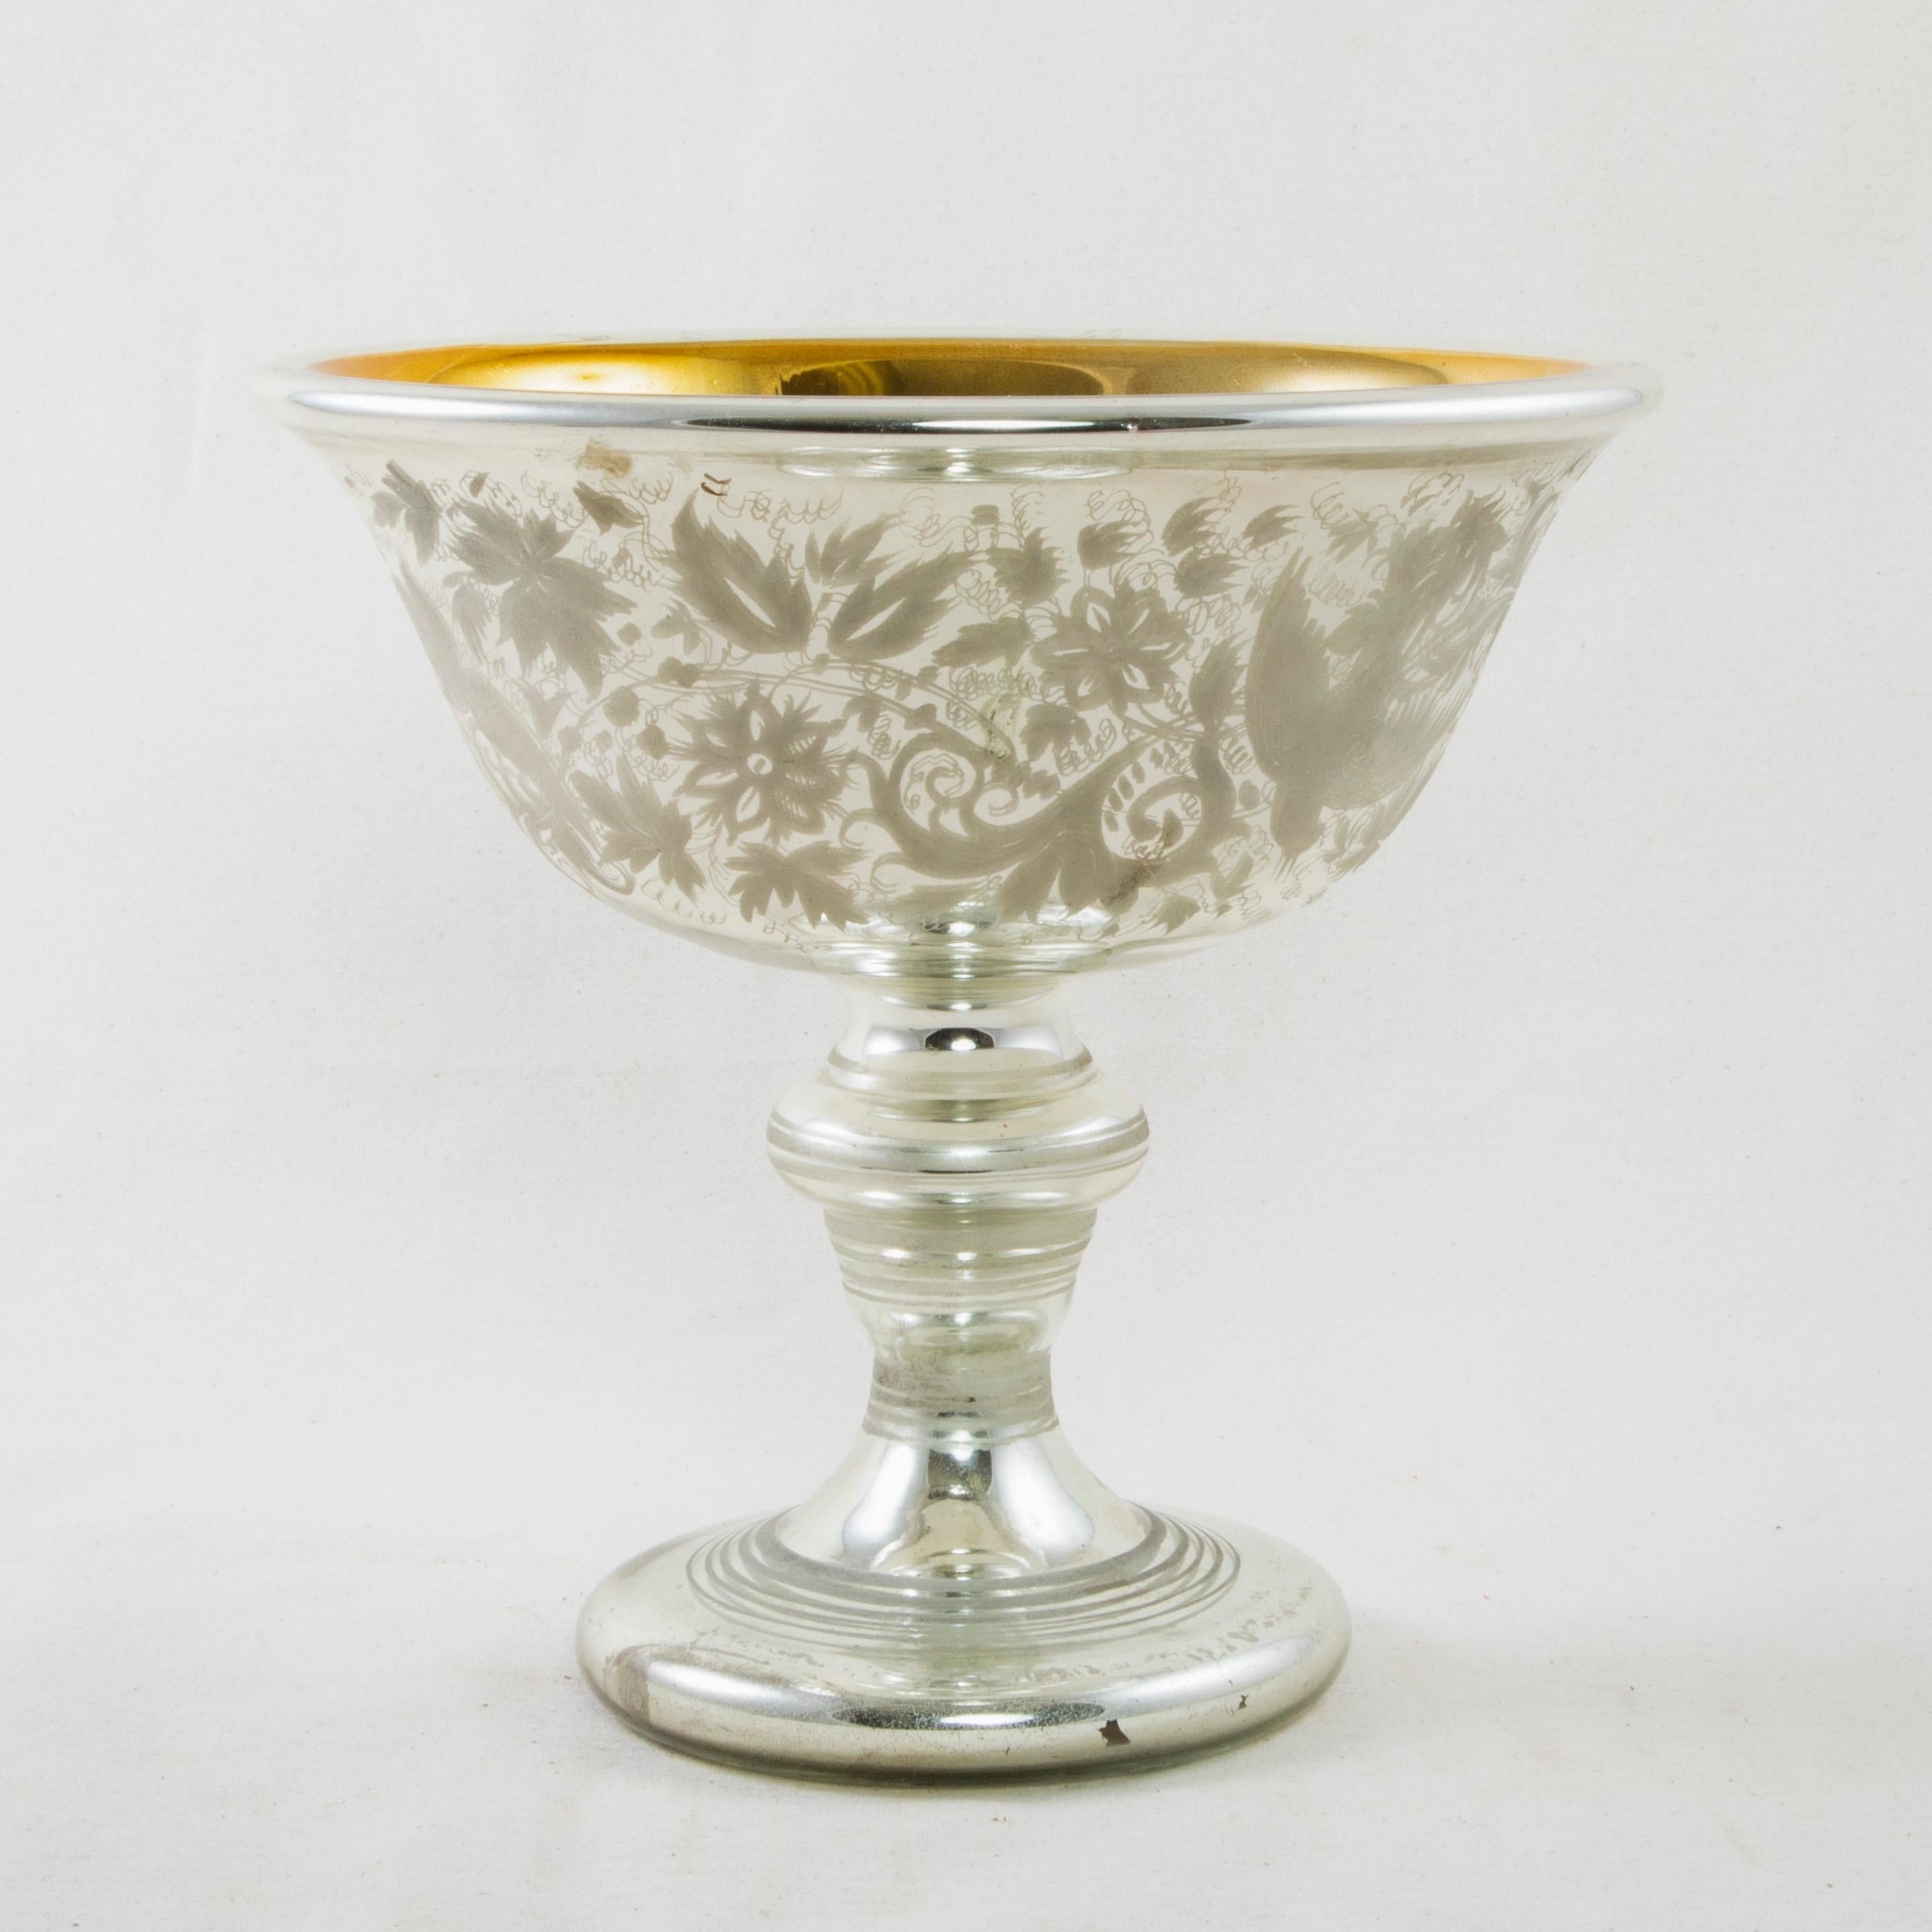 This French mercury glass compote or decorative bowl from the turn of the 20th century features a gold interior and an intricately etched design with flowers and birds around the exterior. The bowl rests on a footed base detailed with etched rings.